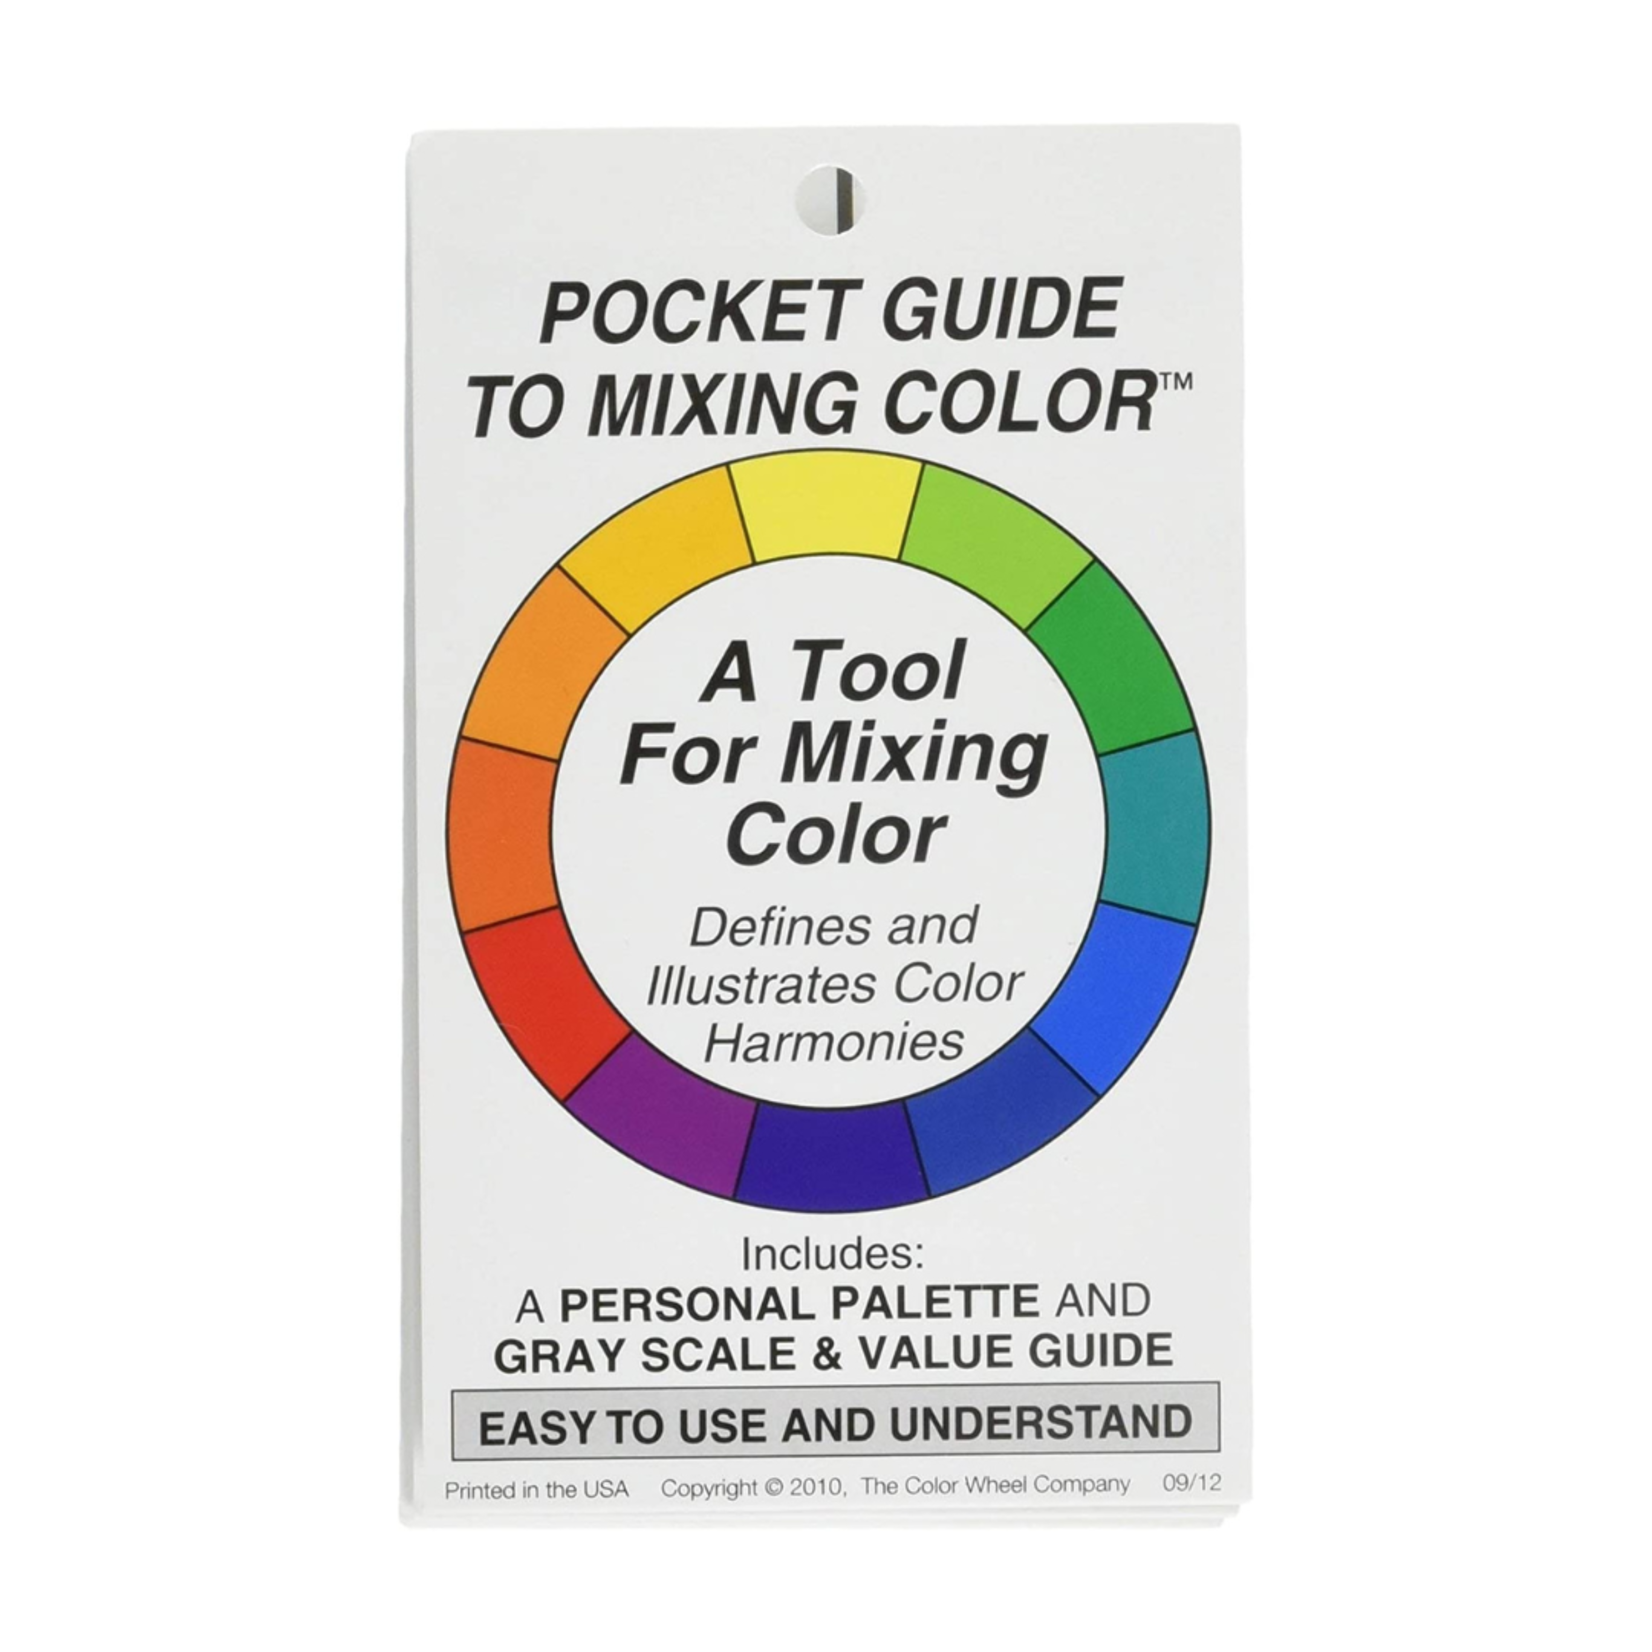 THE COLOR WHEEL COMPANY POCKET GUIDE TO MIXING COLOR